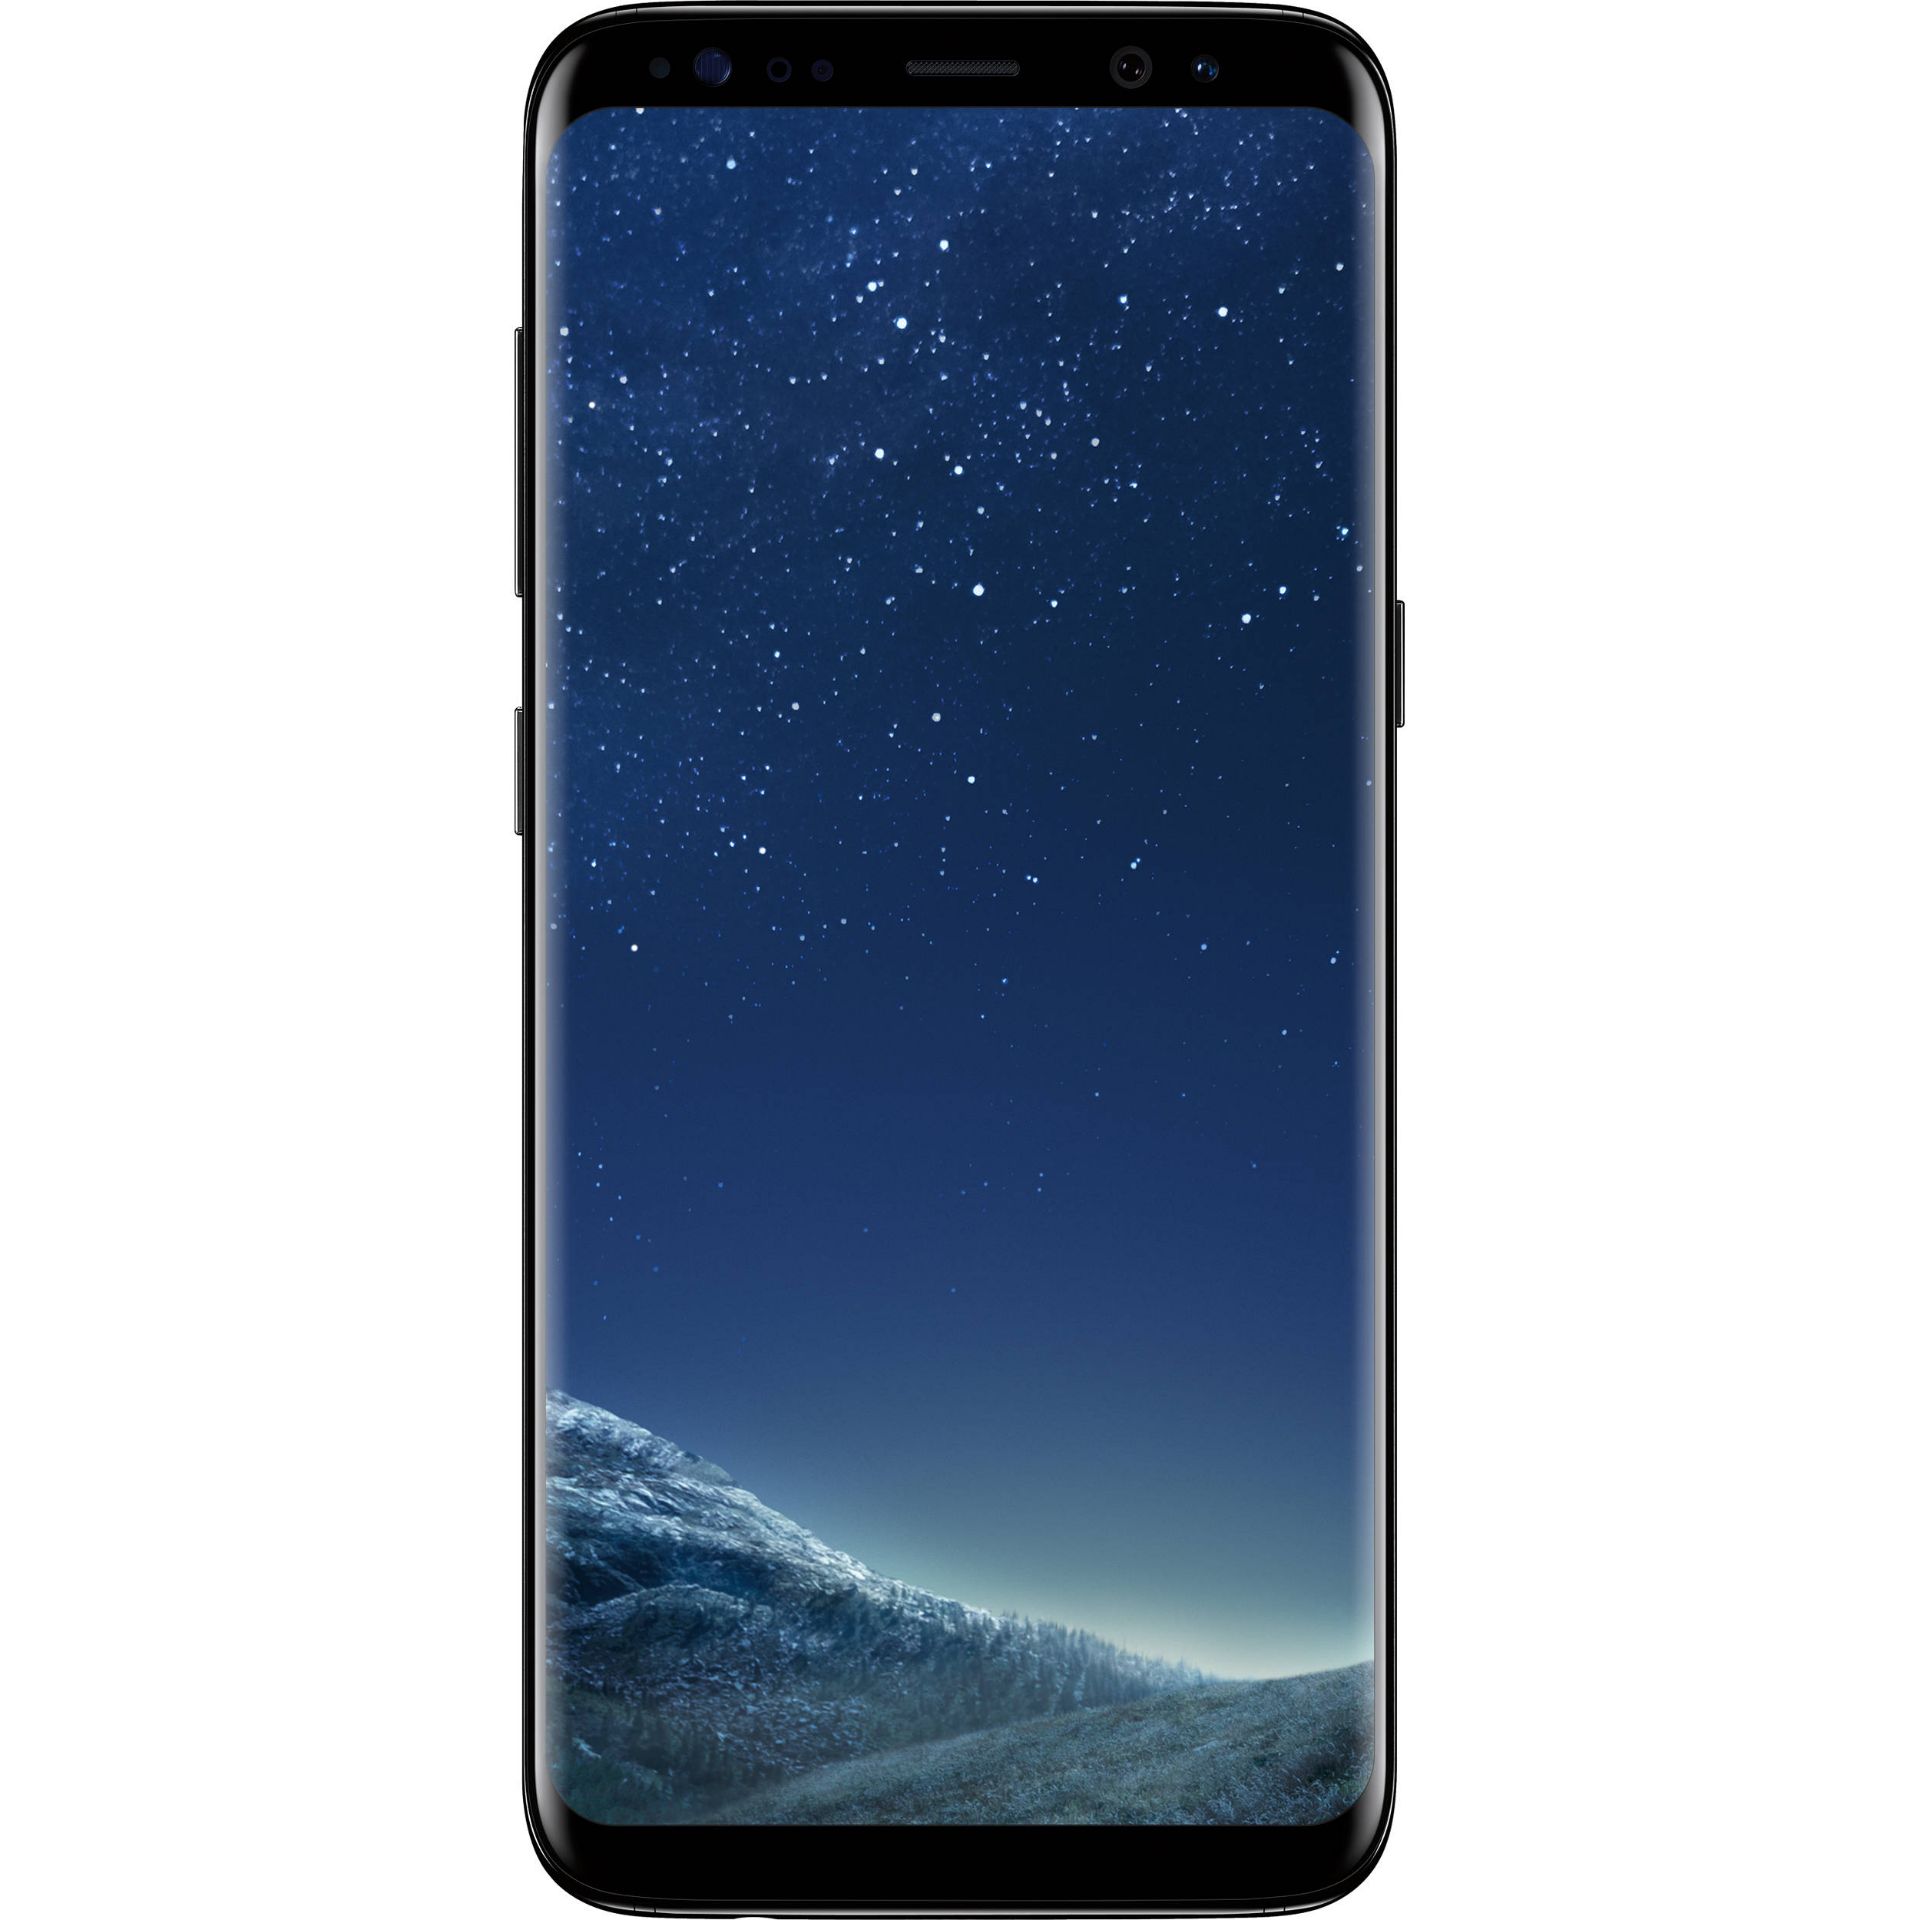 No VAT Grade A Samsung S8 ( G950U) Colours May Vary - Item Available After Approx 15 Working Days